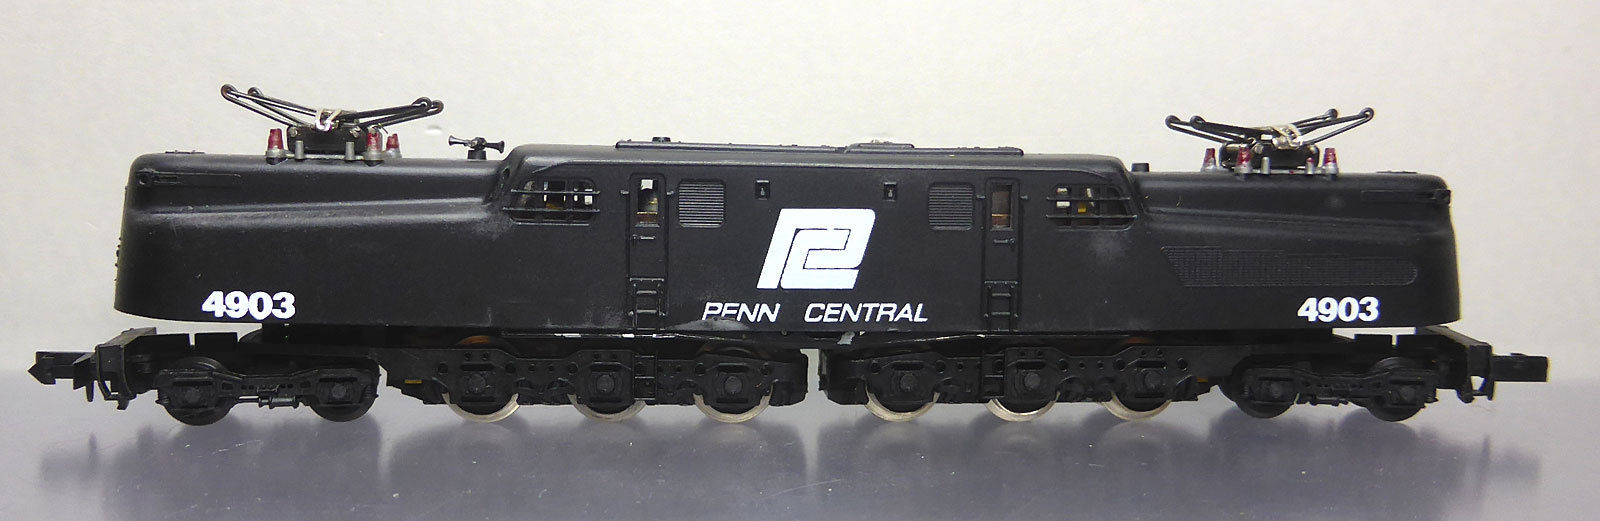 N Scale - Arnold - 0275P - Locomotive, Electric, GG1 - Penn Central - 4903